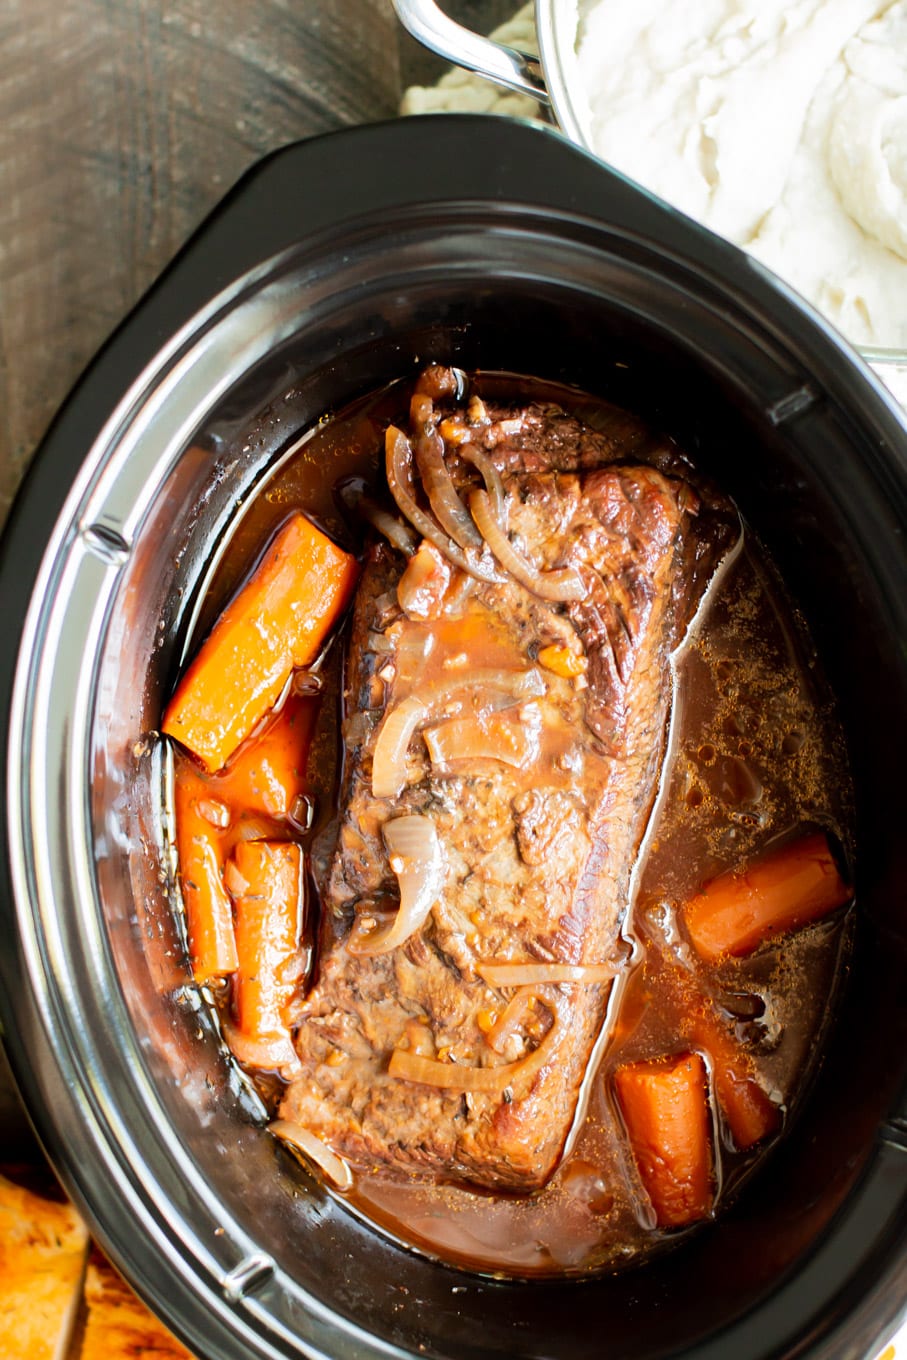 cooked brisket in the slow cooker with carrots and onions.